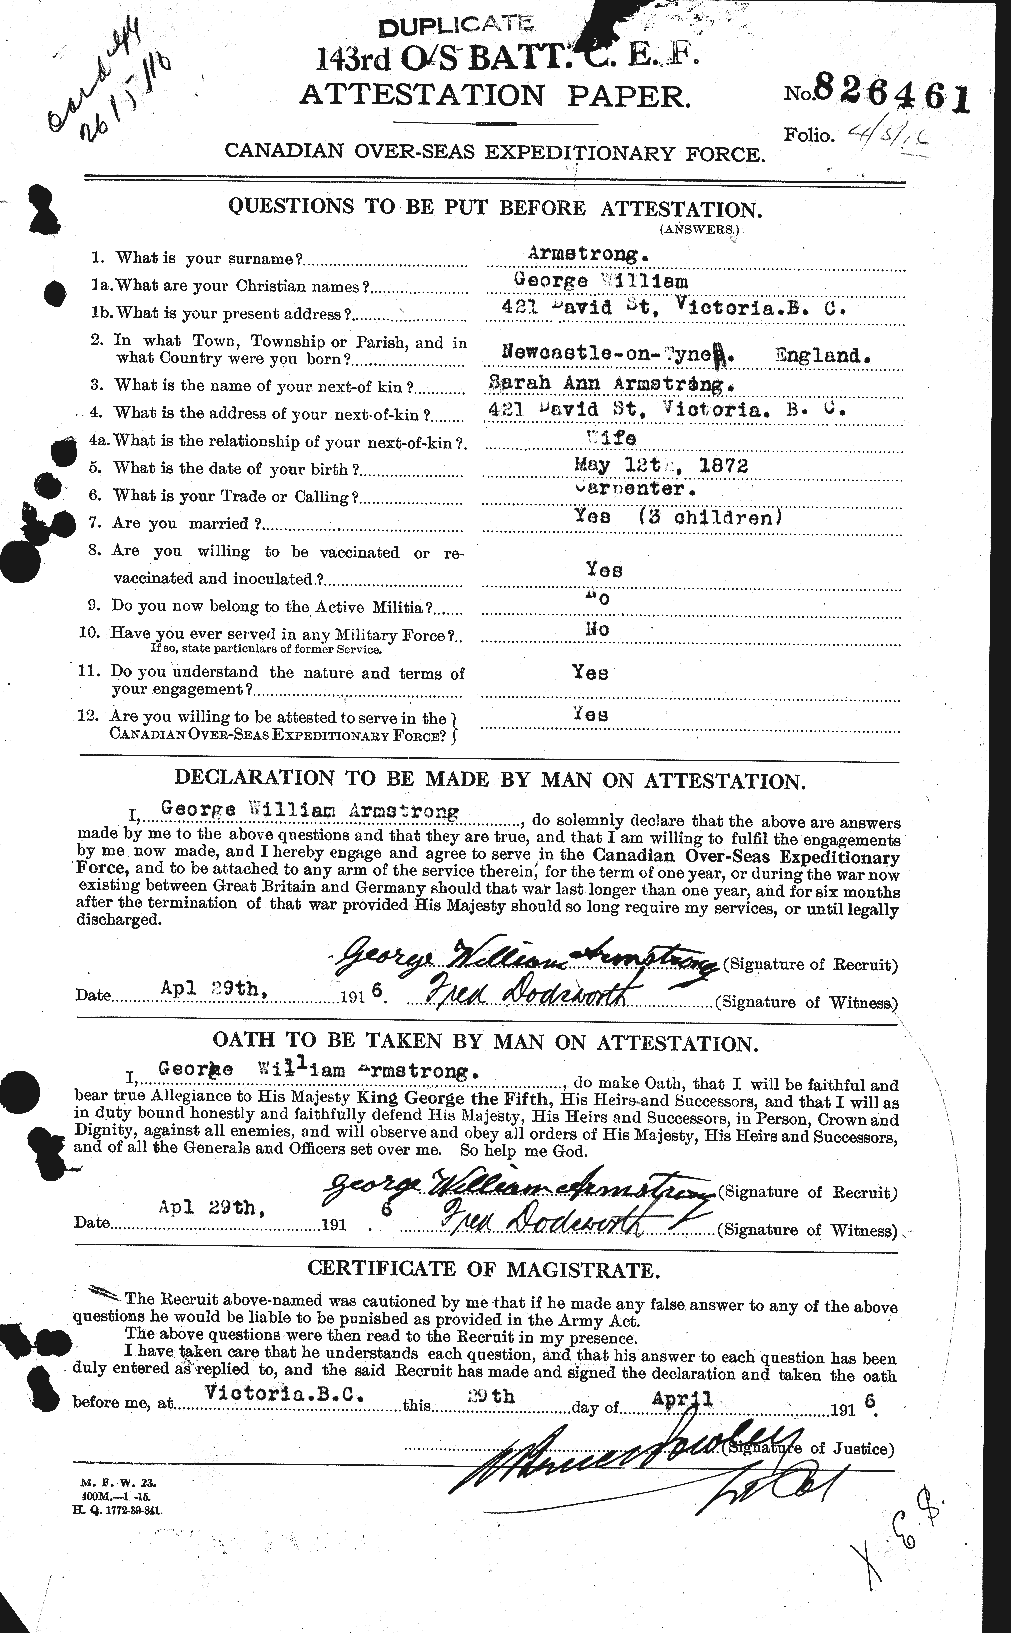 Personnel Records of the First World War - CEF 213703a